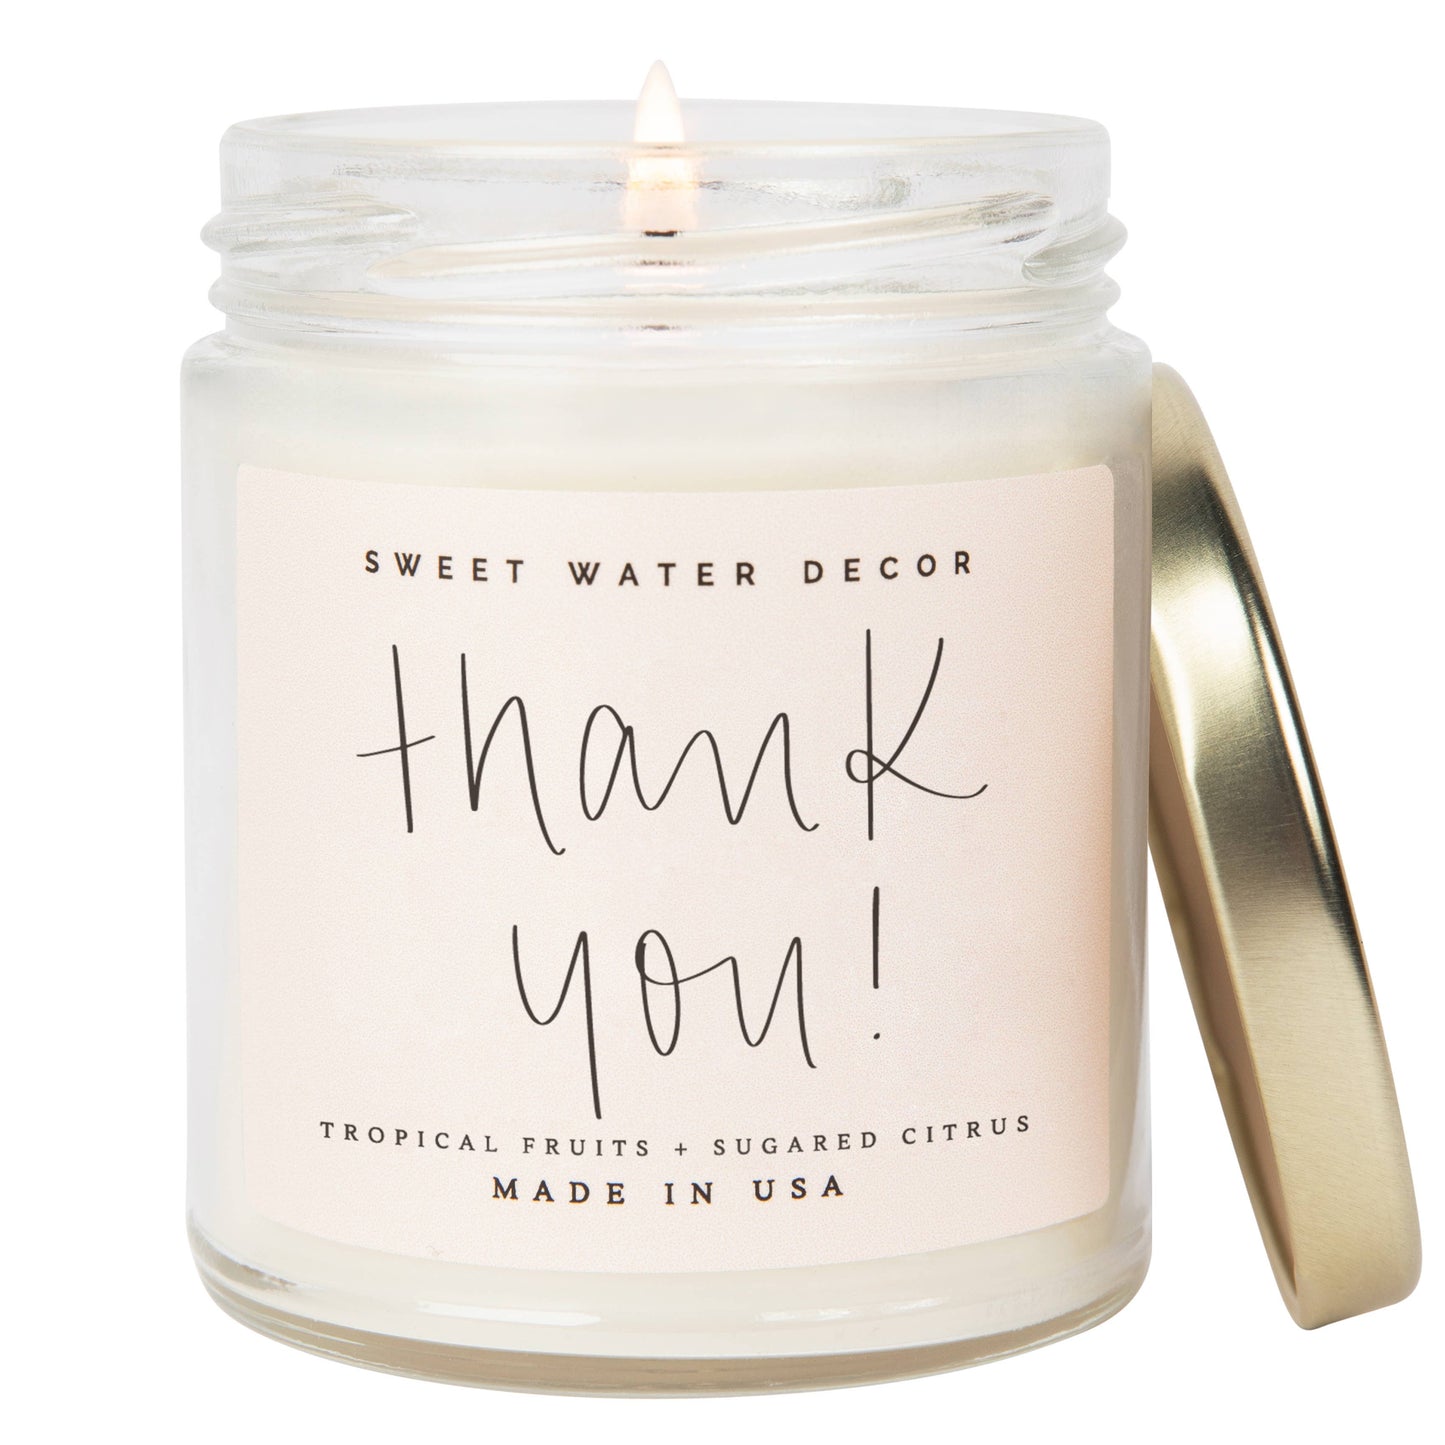 Thank You! 9 oz Soy Candle - Home Decor & Gifts